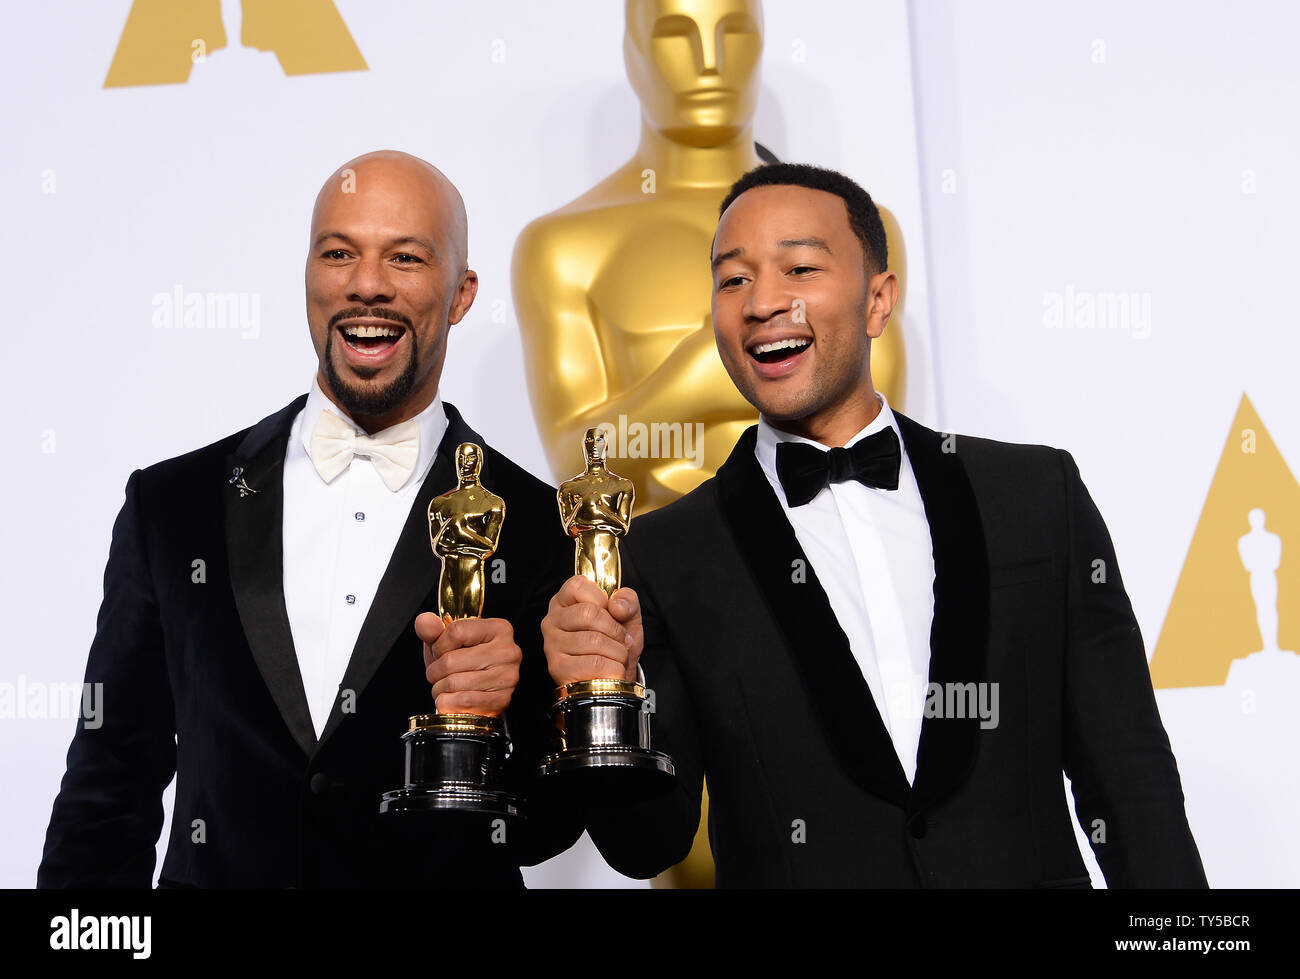 Lonnie Rashid Lynn, Jr. 'Common' and John Legends, winners of Best Song for 'Glory' in Selma, pose backstage with his Oscar during the 87th Academy Awards at the Hollywood & Highland Center in Los Angeles on February 22, 2015. Photo by Jim Ruymen/UPI Stock Photo